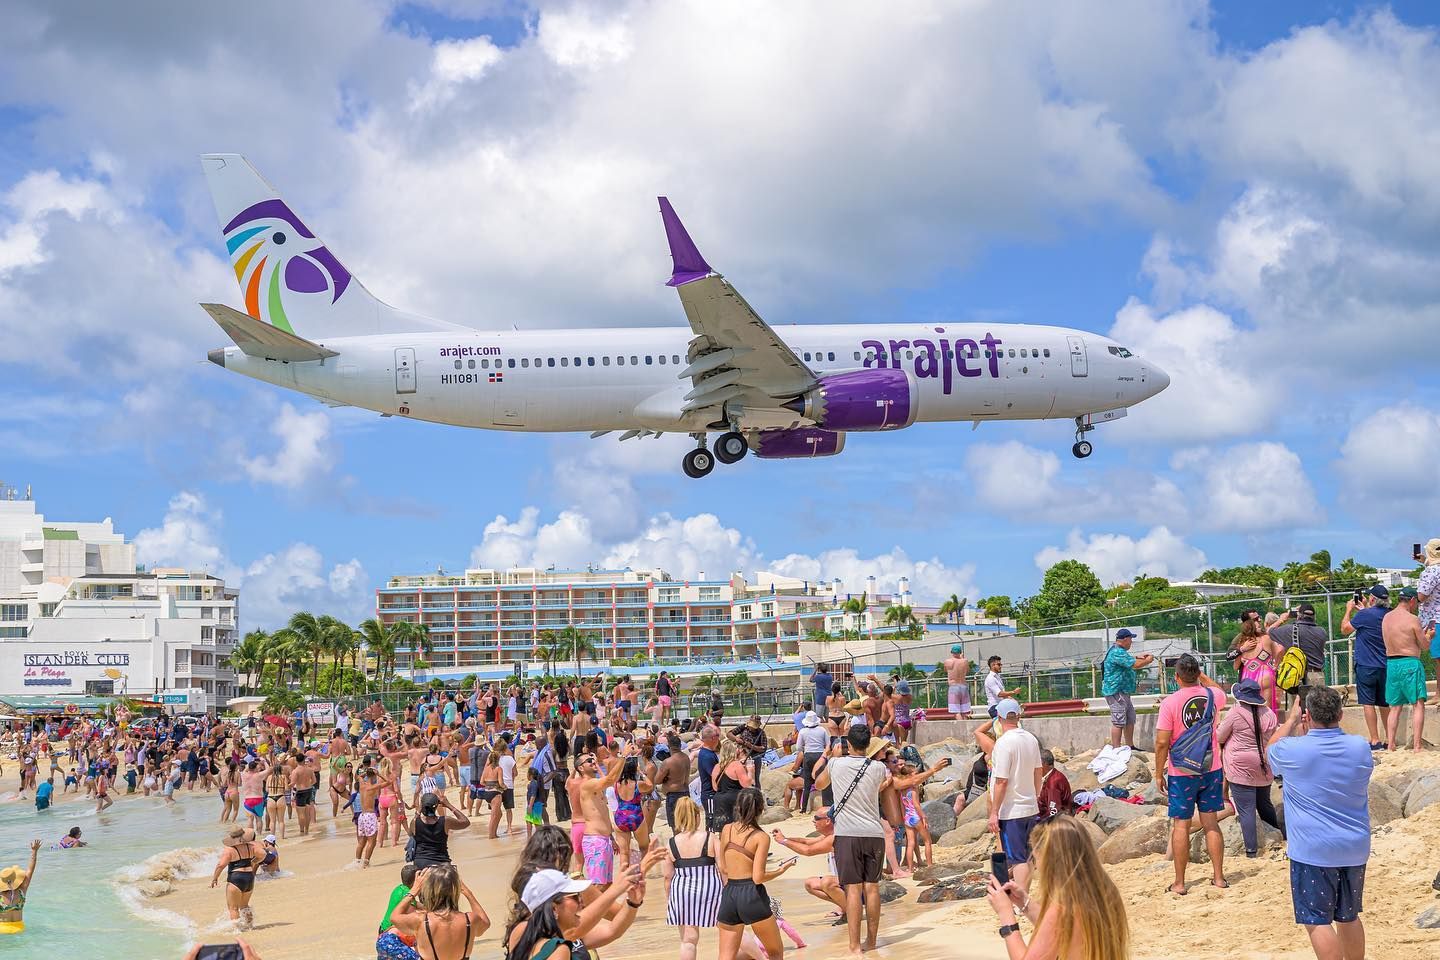 An Arajet Boeing 737 MAX 8 just above many beach goers in St. Martin.